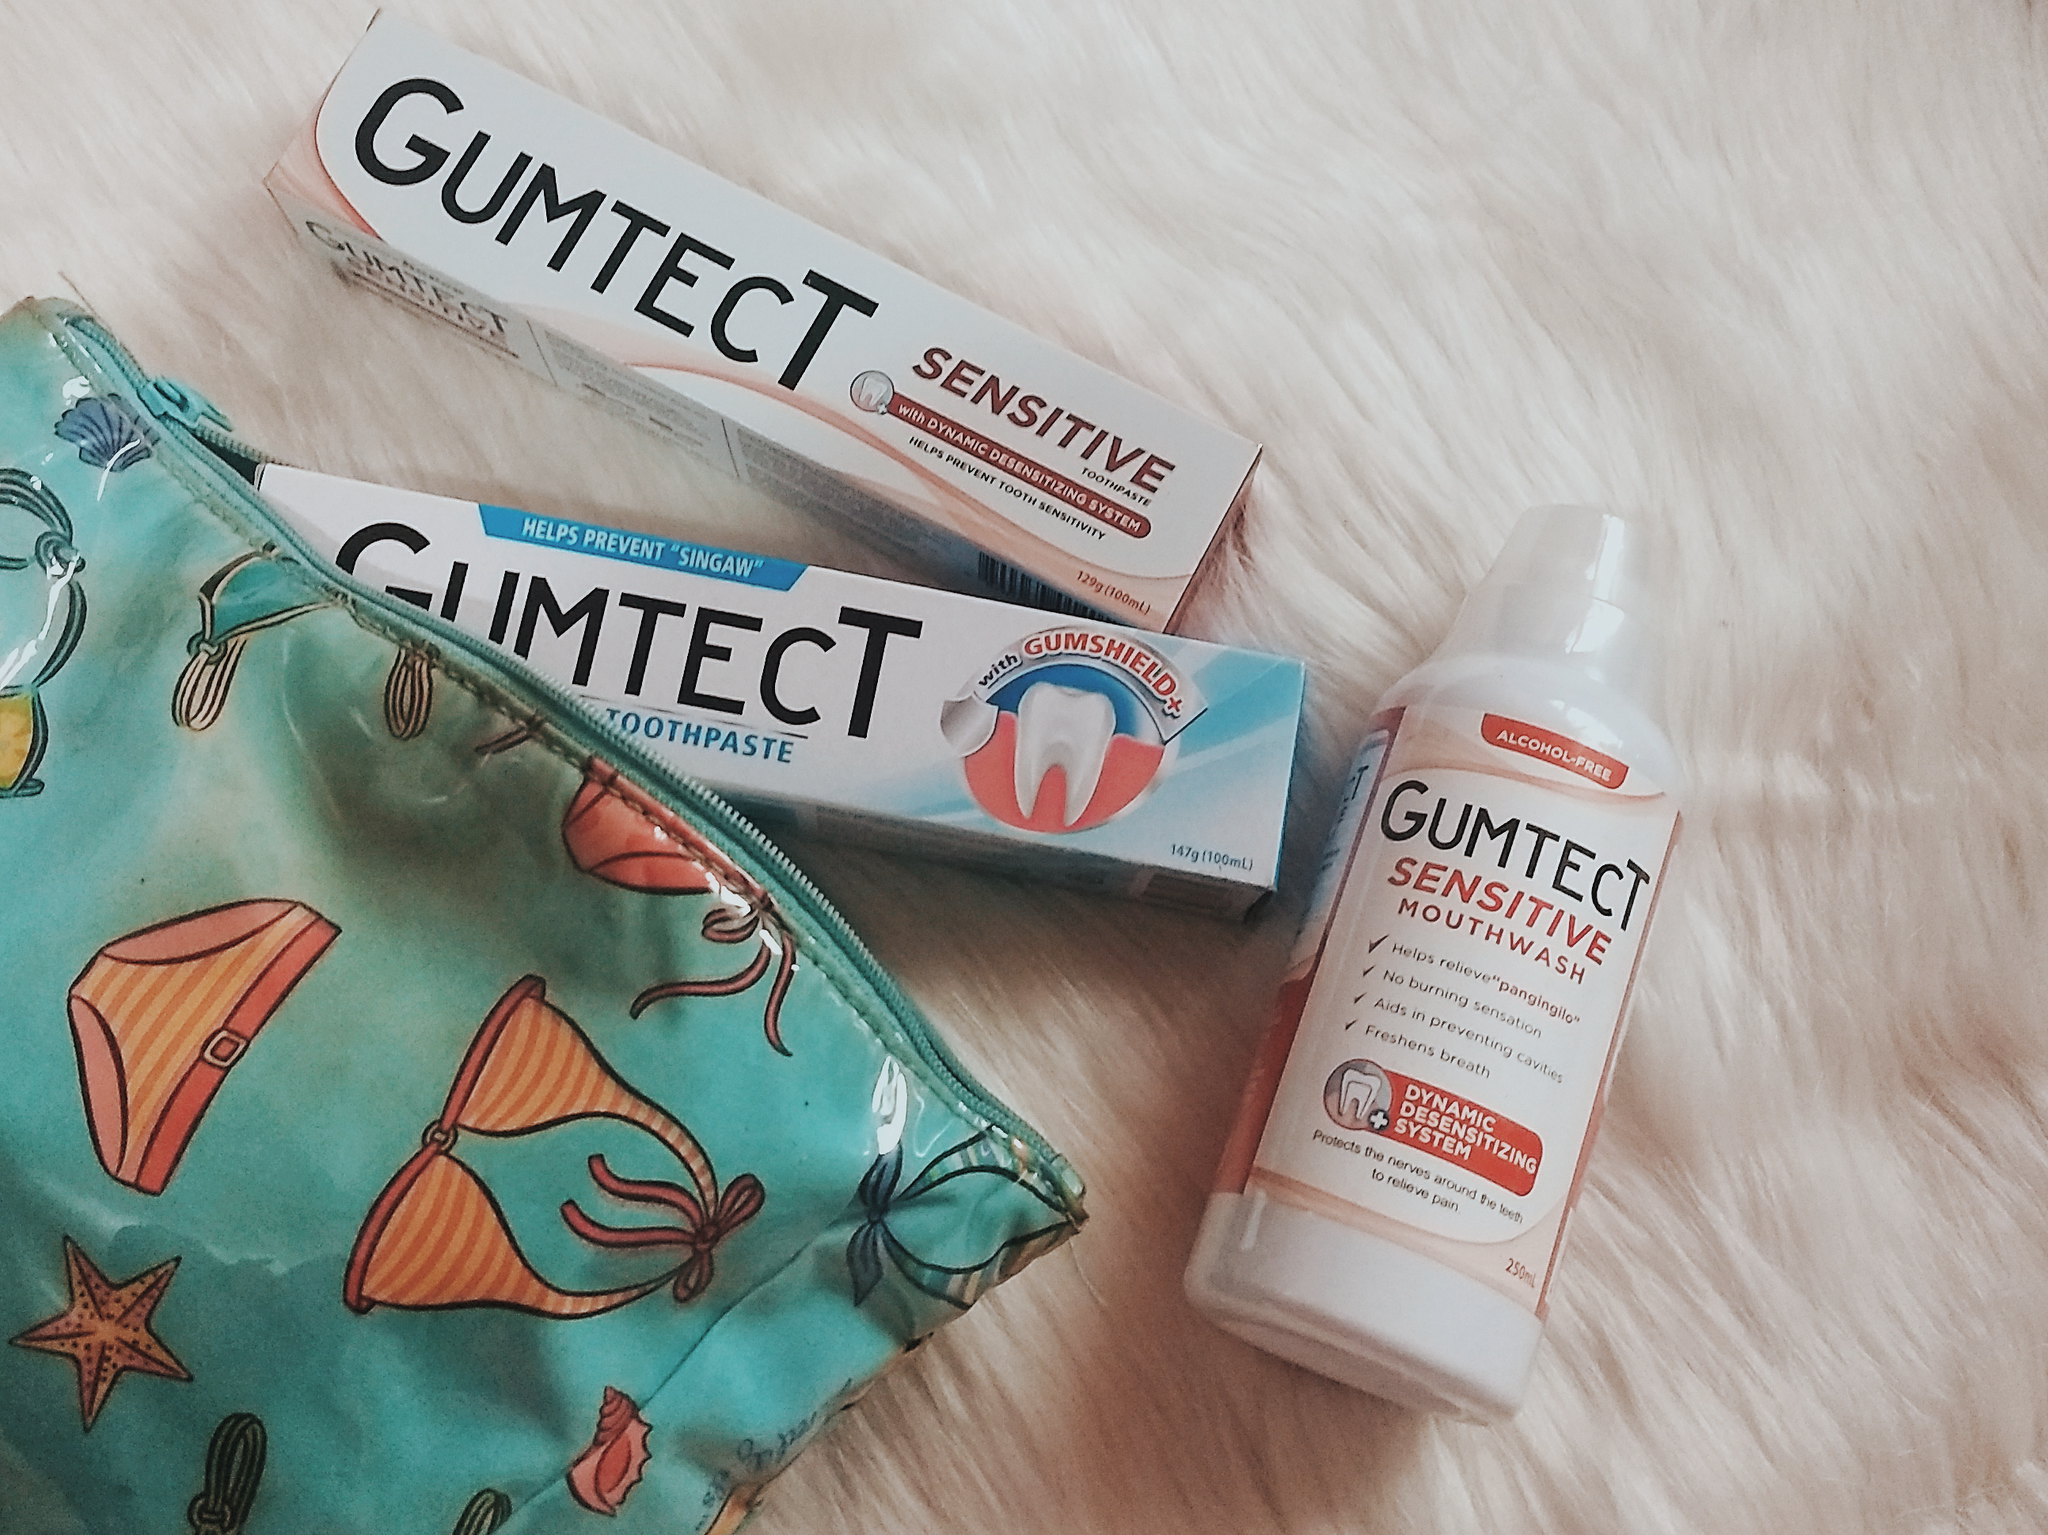 GumTect Gum Care Toothpaste and Toothbrush